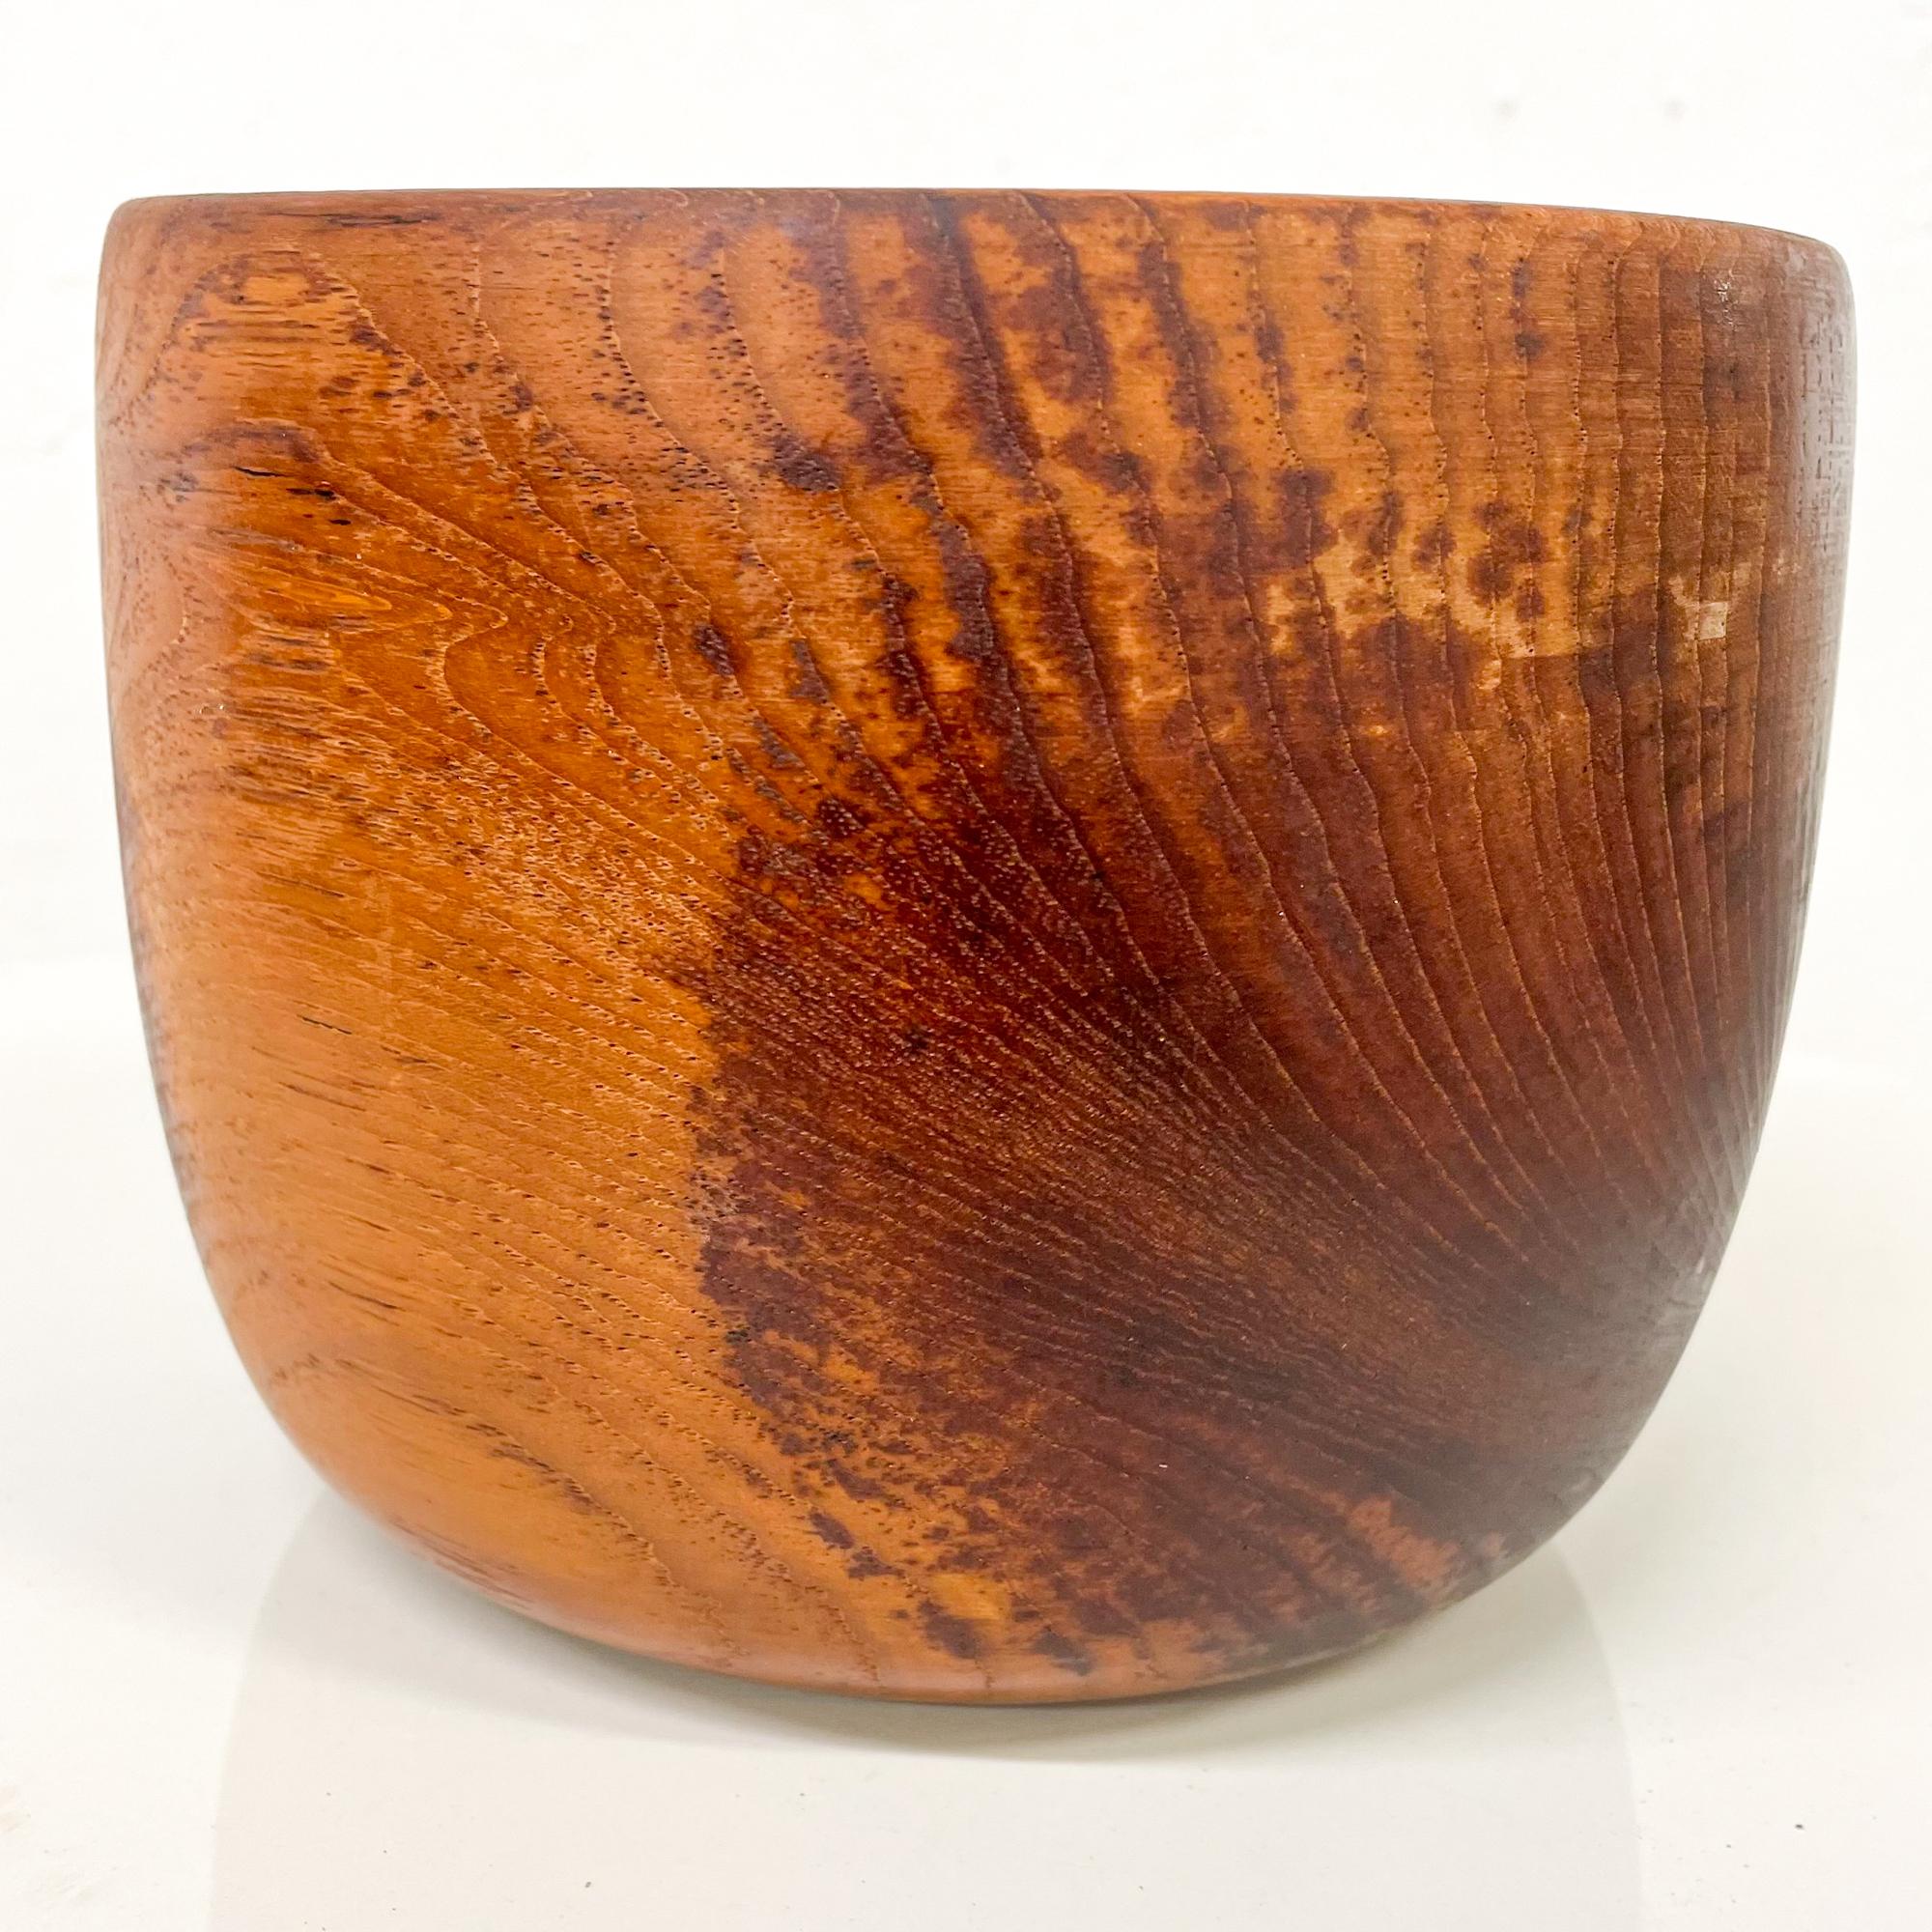 For your consideration a modern bowl made of solid teak wood. Sculptural shape. Stamped underneath with maker information (Only half of the stamp is visible). 
Made in Sweden. Circa the late 1950s.

Good condition, gently used. Refer to images.